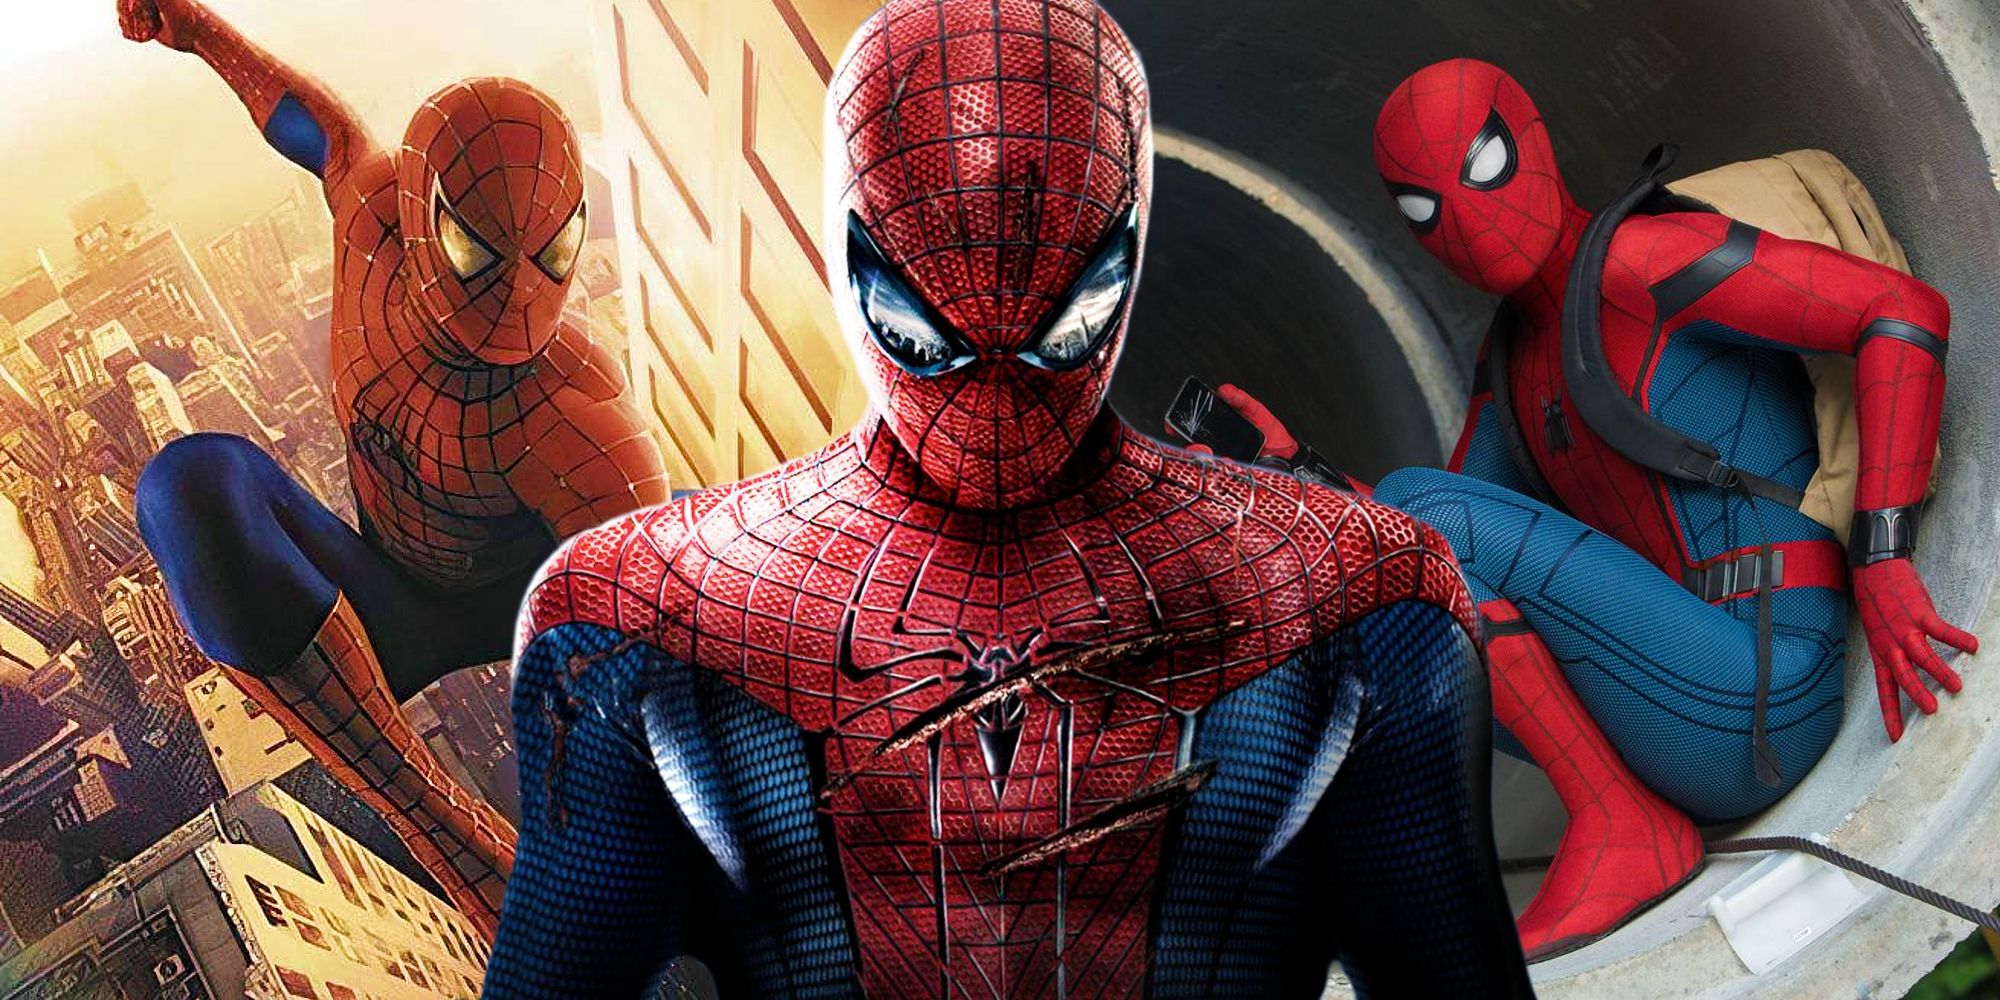 How To Watch Spider-Man Movies In Order (Chronologically & By Release Date)